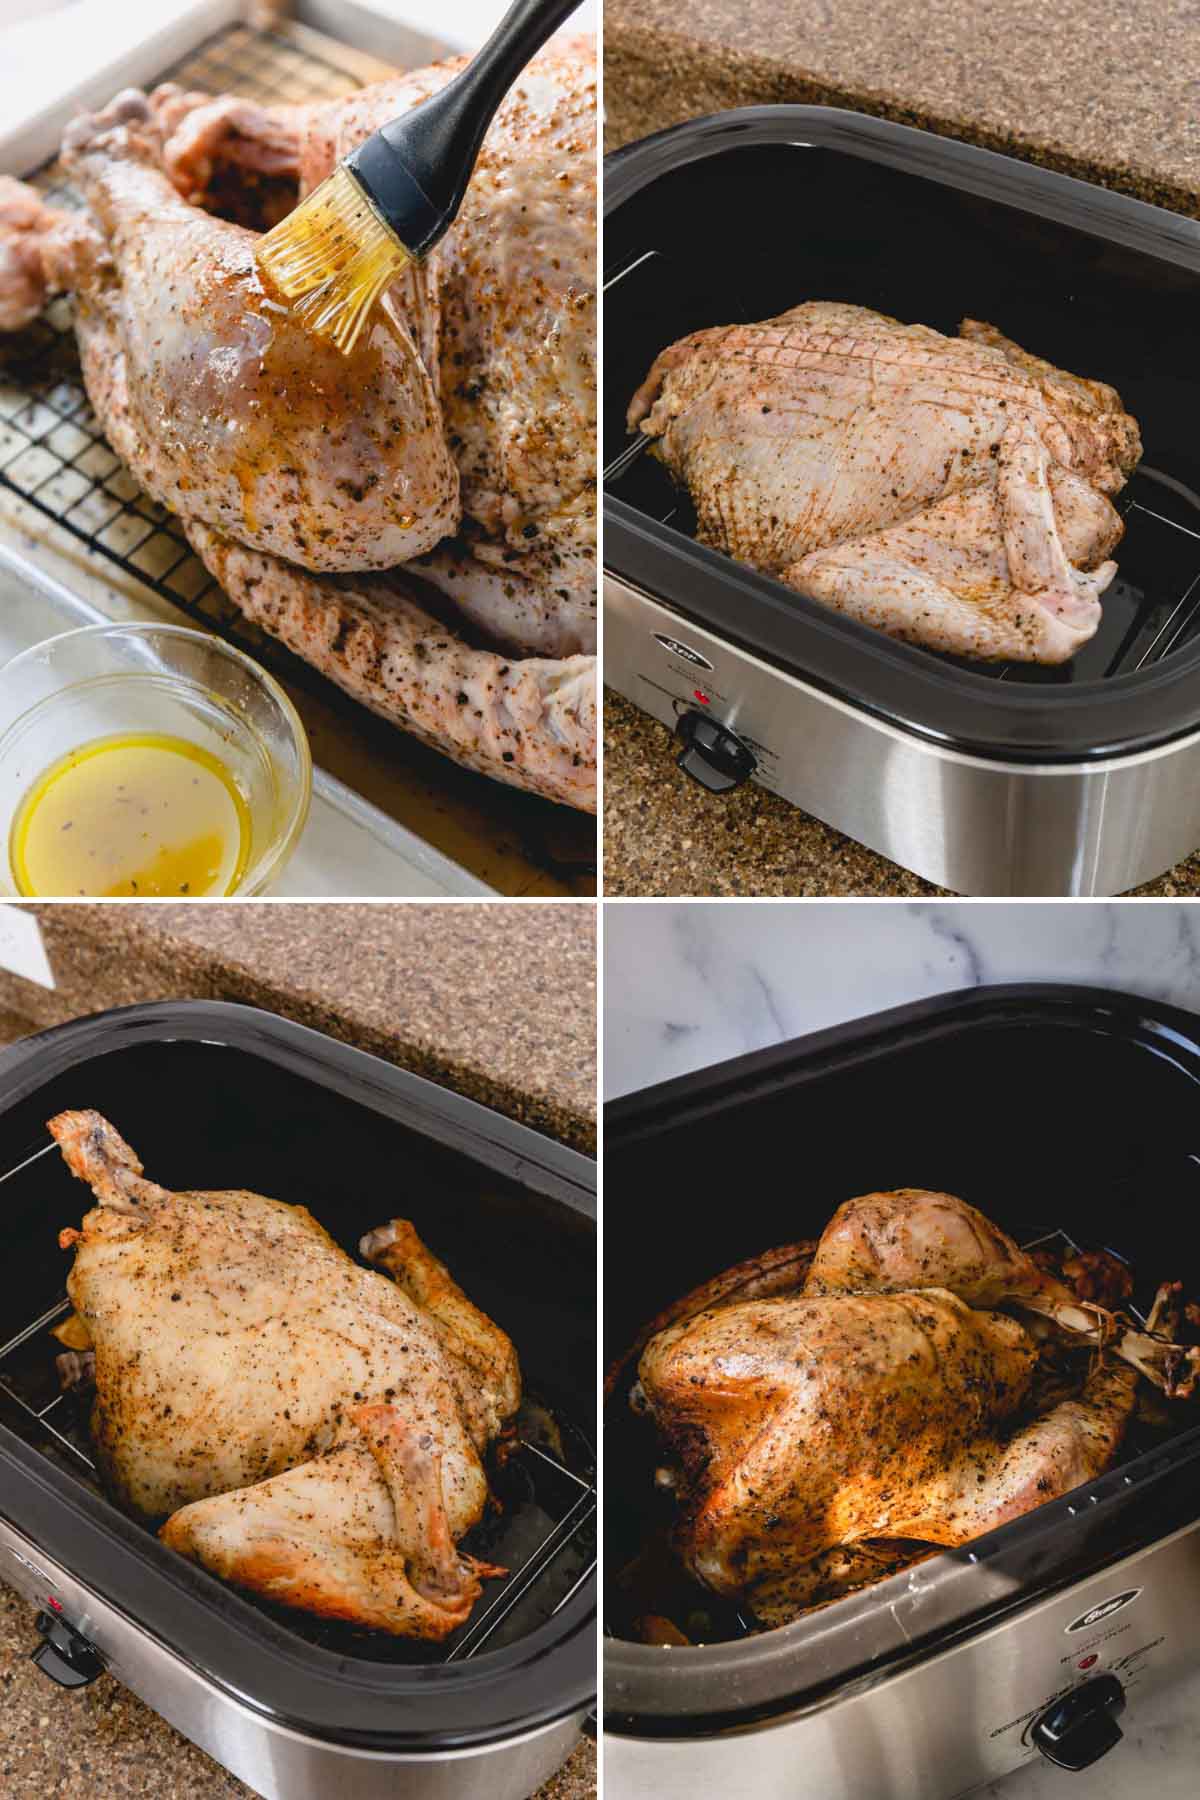 Step by step photos of roasting turkey in an electric roaster.